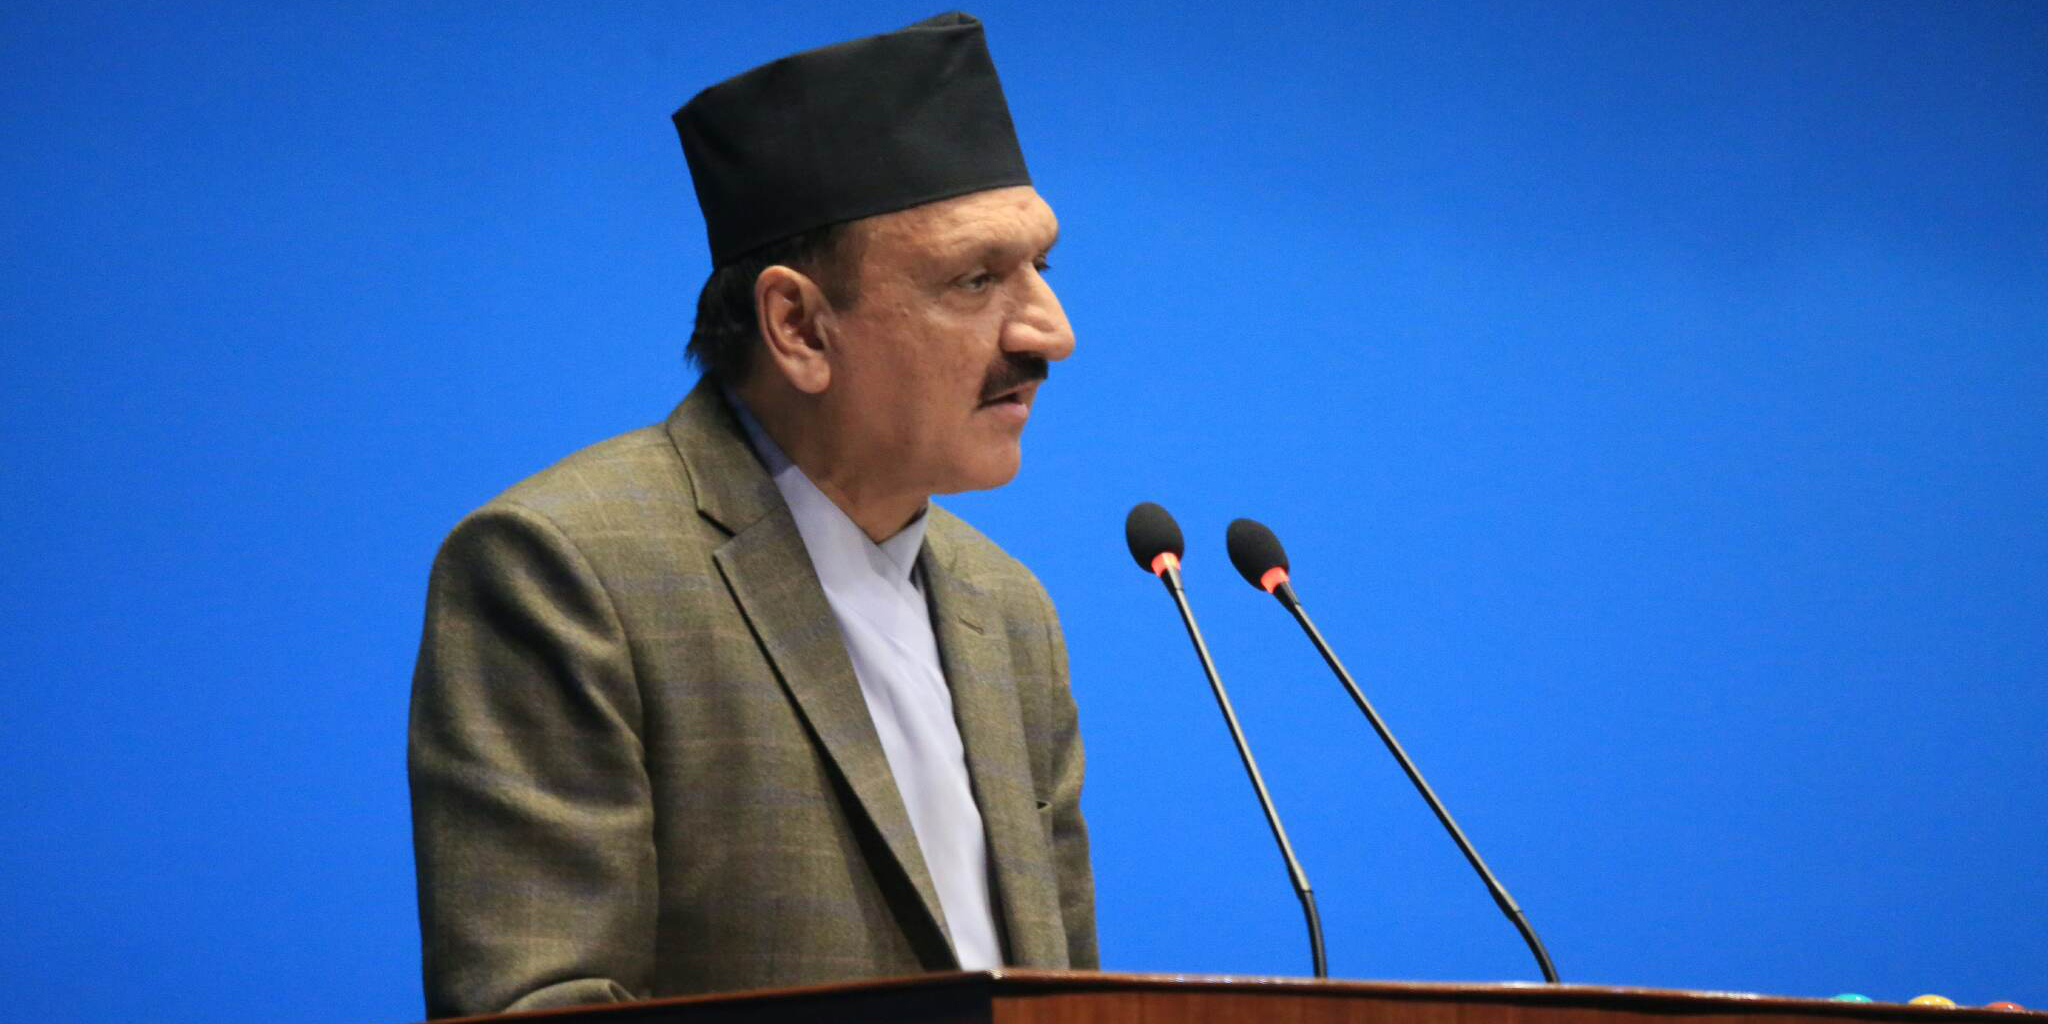 Easing of monetary policy will bring down bank rates: Mahat